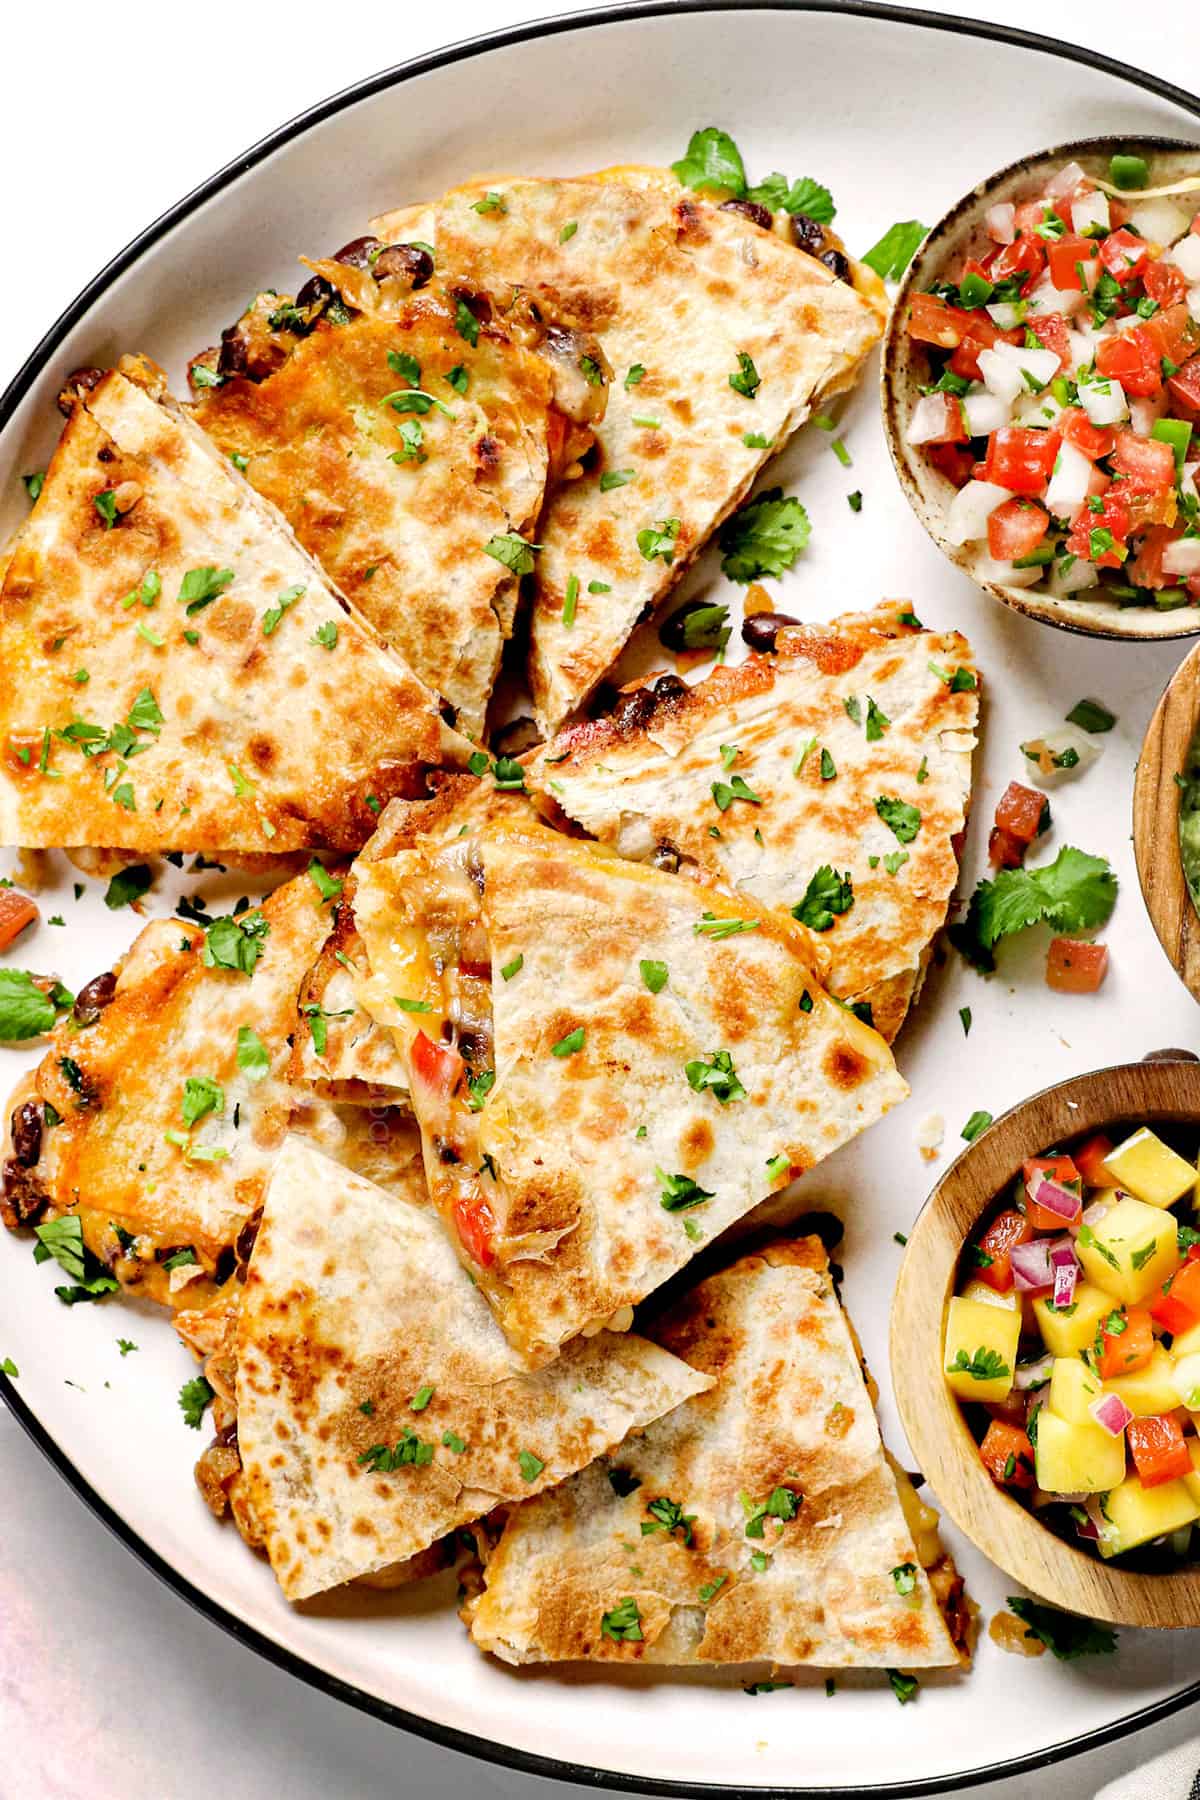 showing how to serve chicken quesadillas recipe by slicing into wedges and serving with pico de gallo, salsa and guacamole on a platter